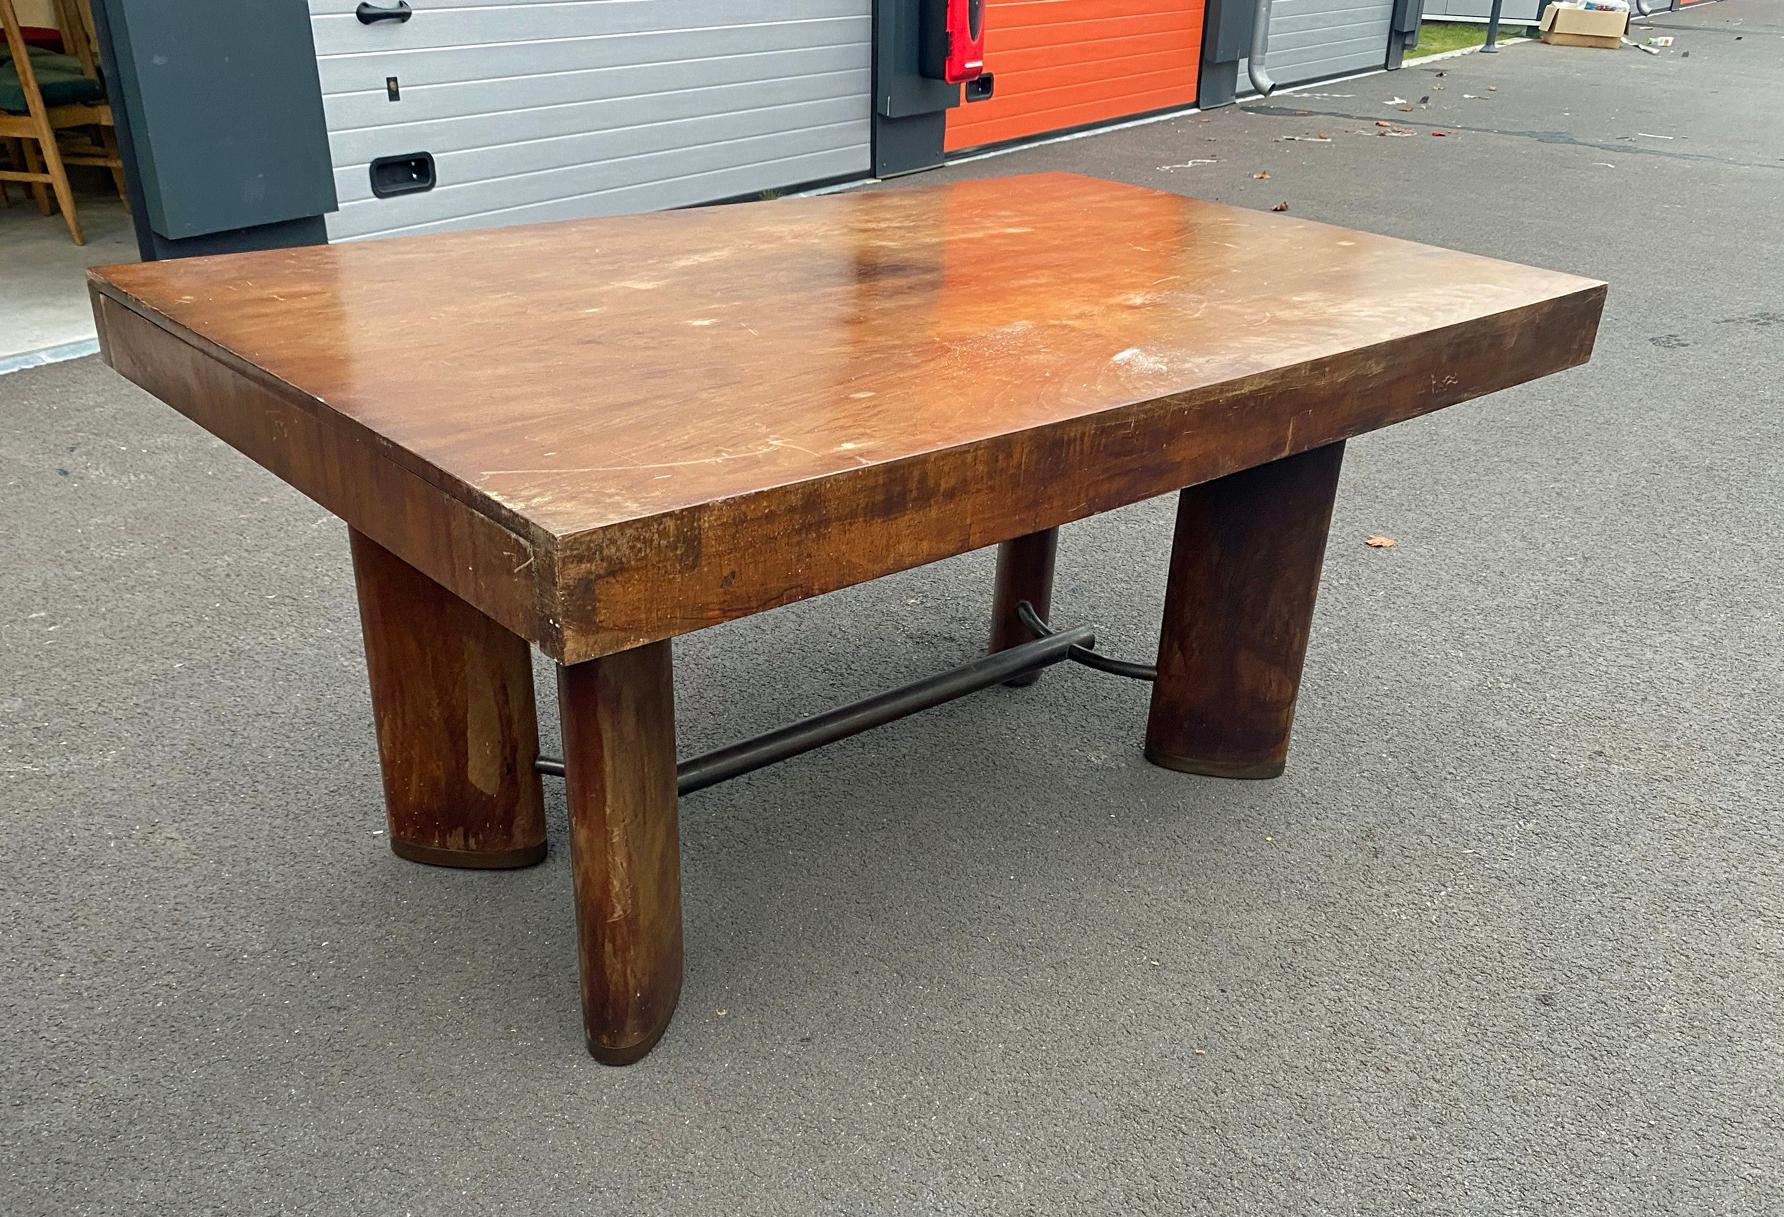 Modernist Art Deco Desk or Table in Walnut, Metal Spacer and Shoe, circa 1930 In Good Condition For Sale In Saint-Ouen, FR